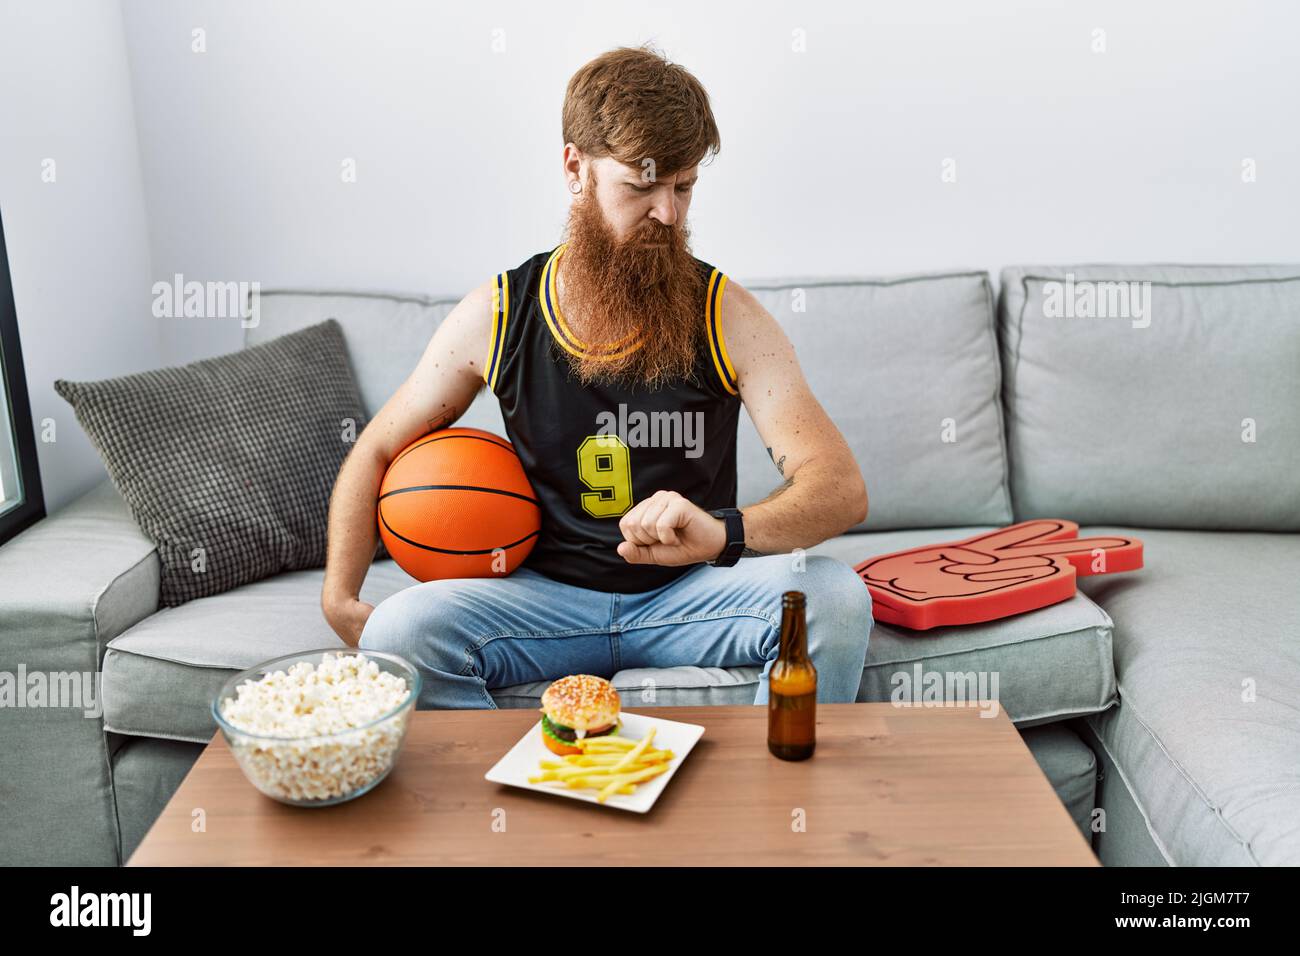 Caucasian man with long beard holding basketball ball cheering tv game checking the time on wrist watch, relaxed and confident Stock Photo